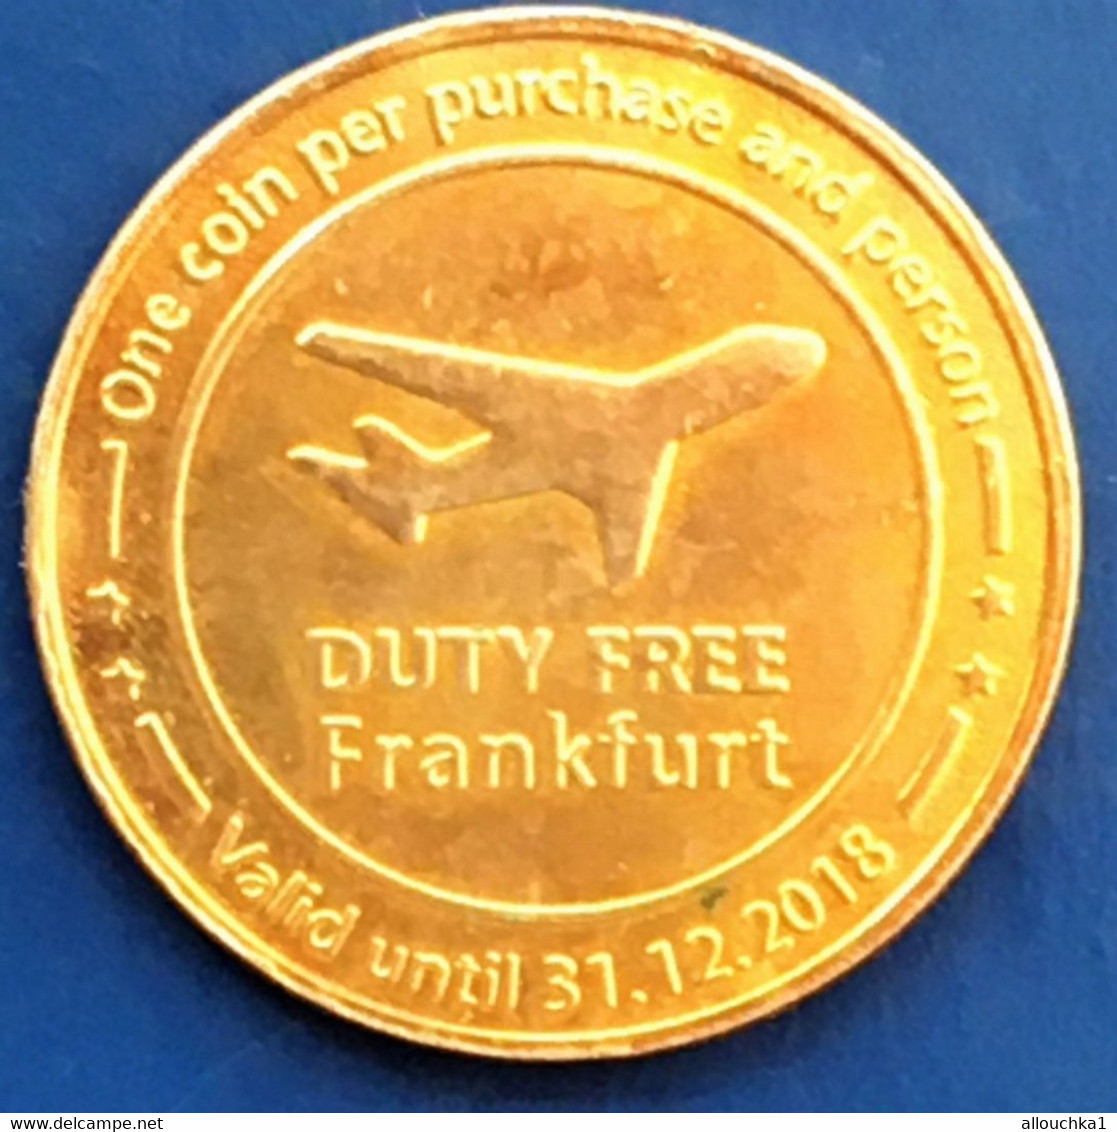 Exclusive At Frankfurt Airport-Frankfort Aéroport-Duty Free One Coin Per Purchase And Person-Valid Limit 31-12-2018--2€ - Professionals/Firms